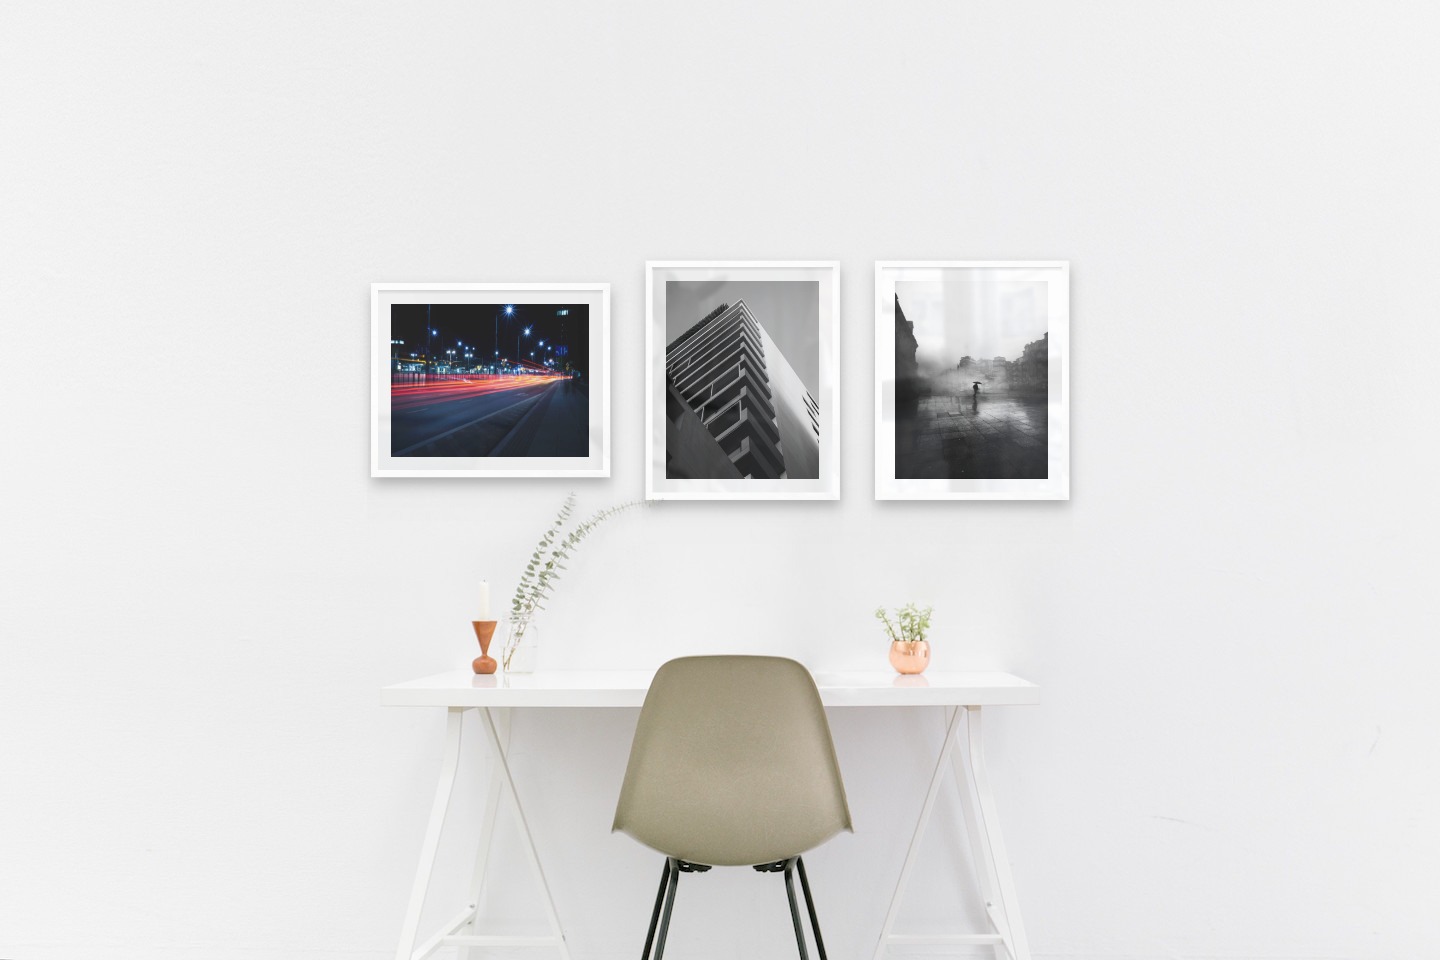 Gallery wall with picture frames in white in sizes 40x50 with prints "Light on the way", "Black and white building" and "Rainy city"